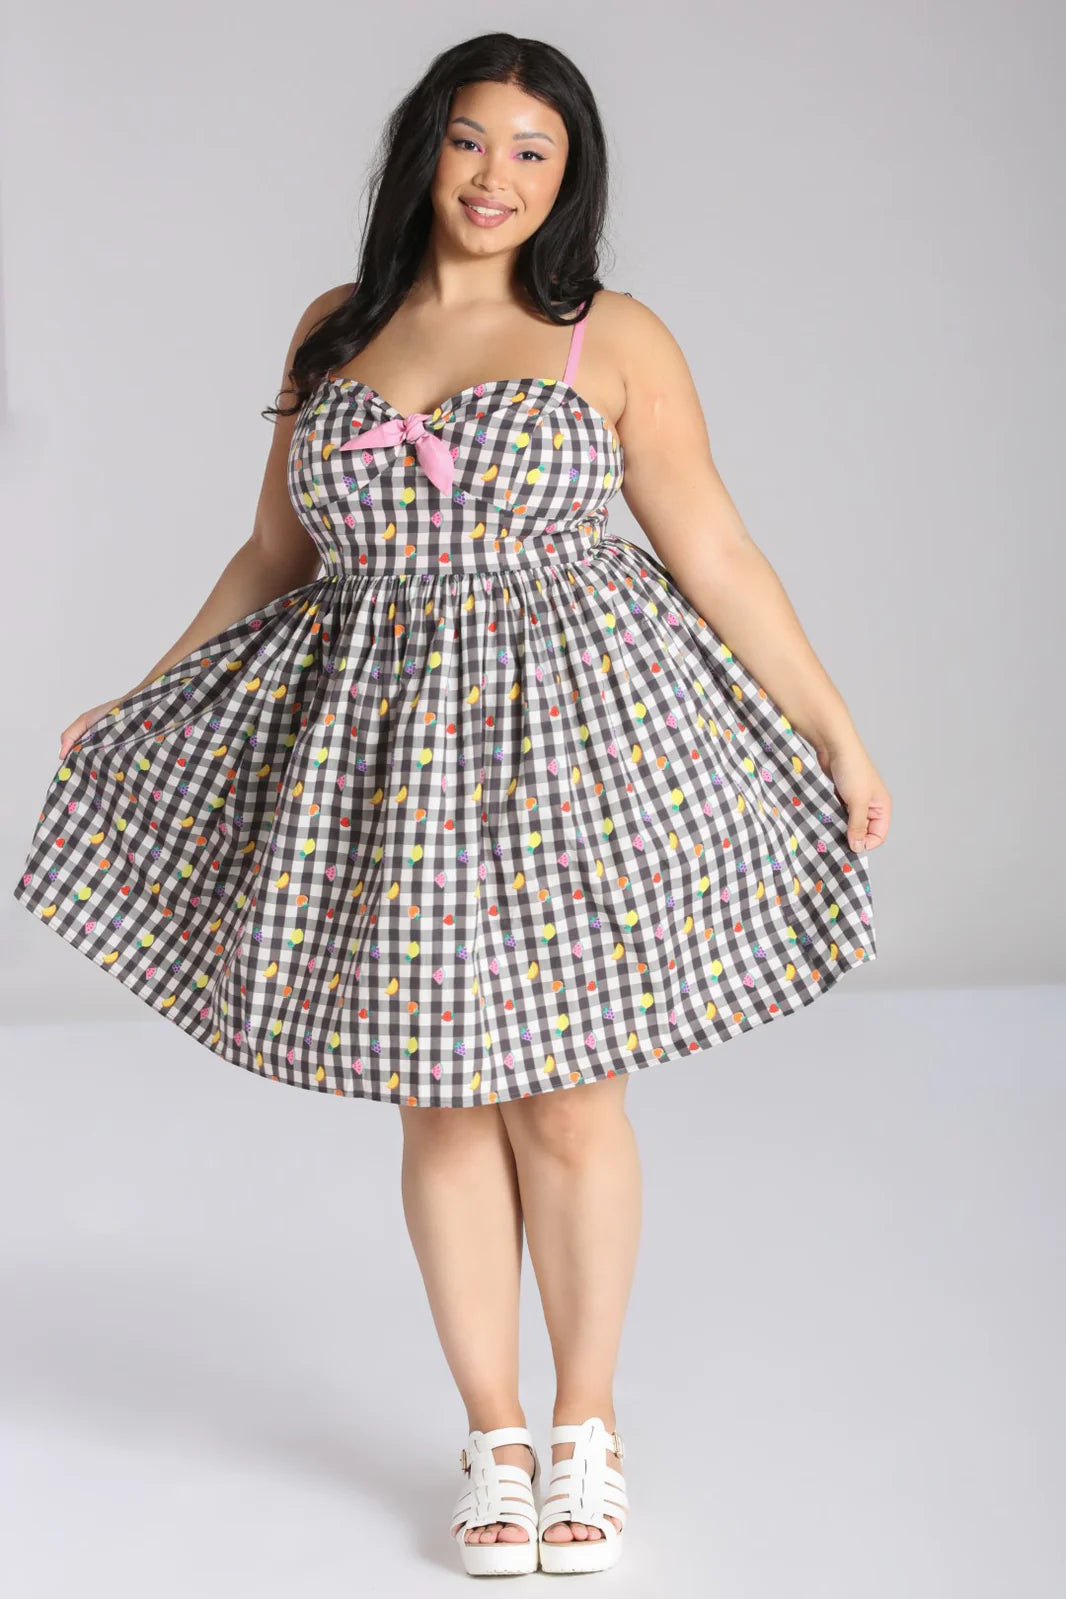 Dark haired woman with a radiant smile standing holding her skirt out at the sides. She is wearing the Fruity Lou Gingham dress by Hell Bunny and chunky white sandals.